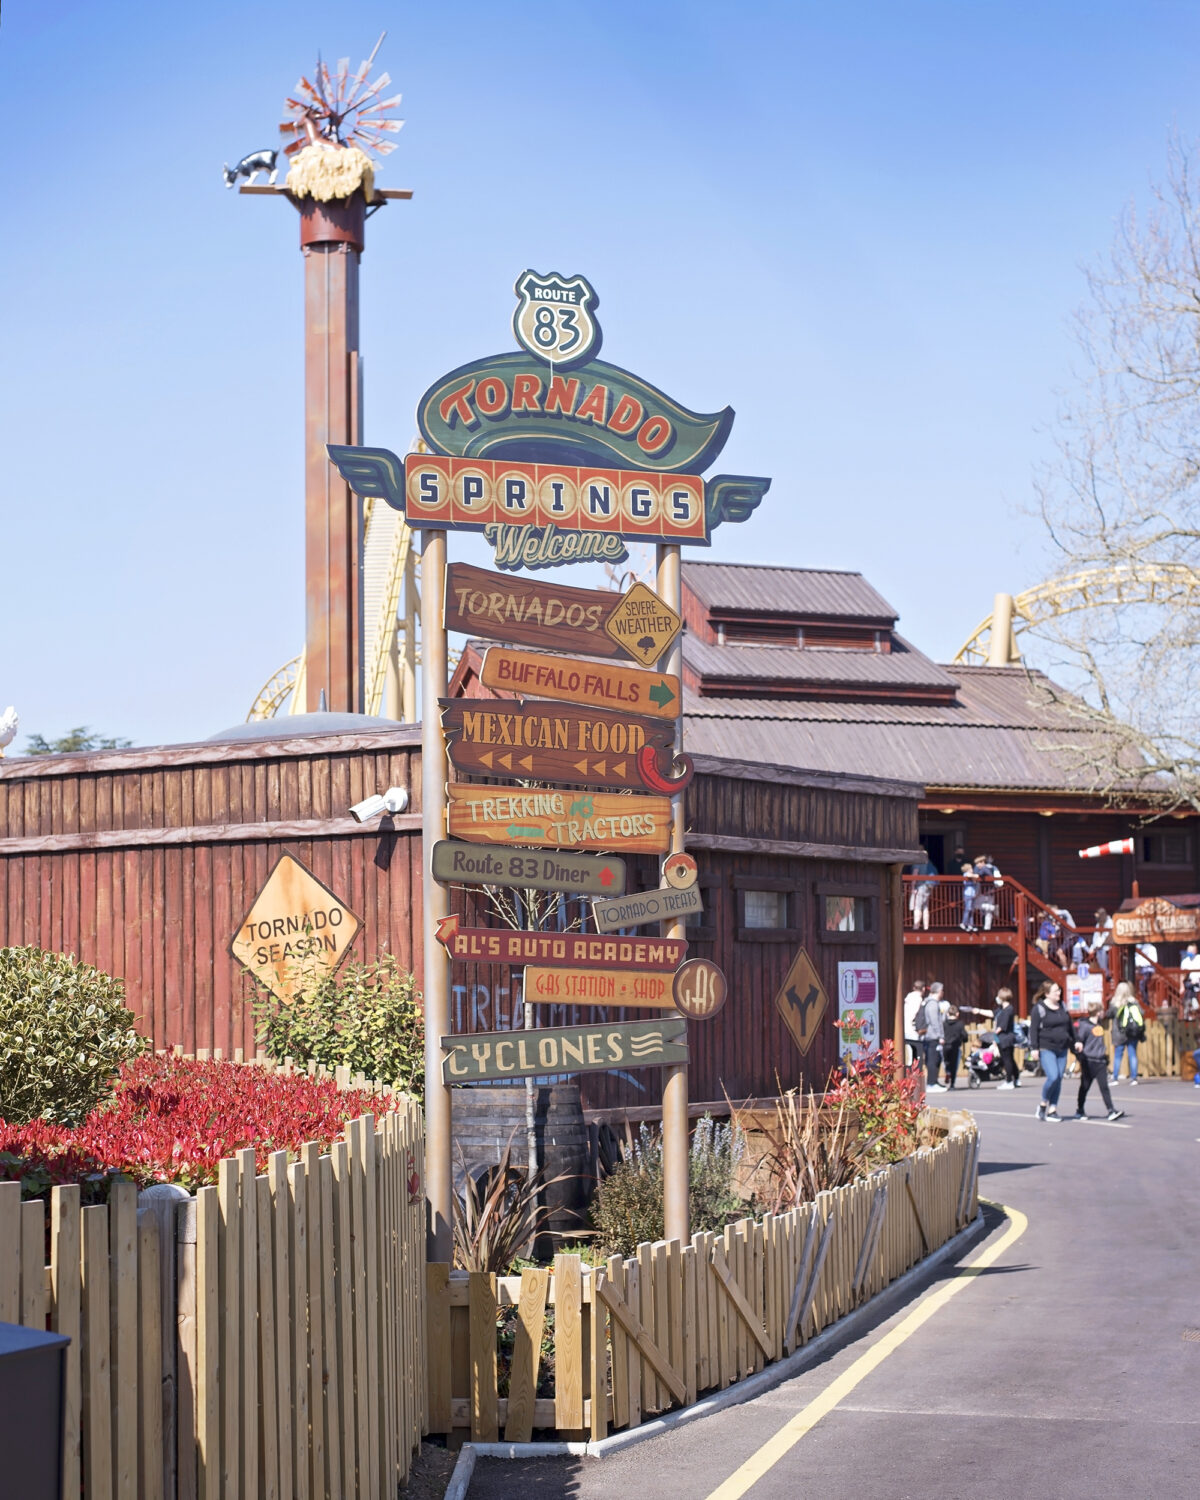 Image shows a directional signpost in Paultons Park Tornado Springs. Made of wood, the names of the rides in the theme park are listed on each arrow.